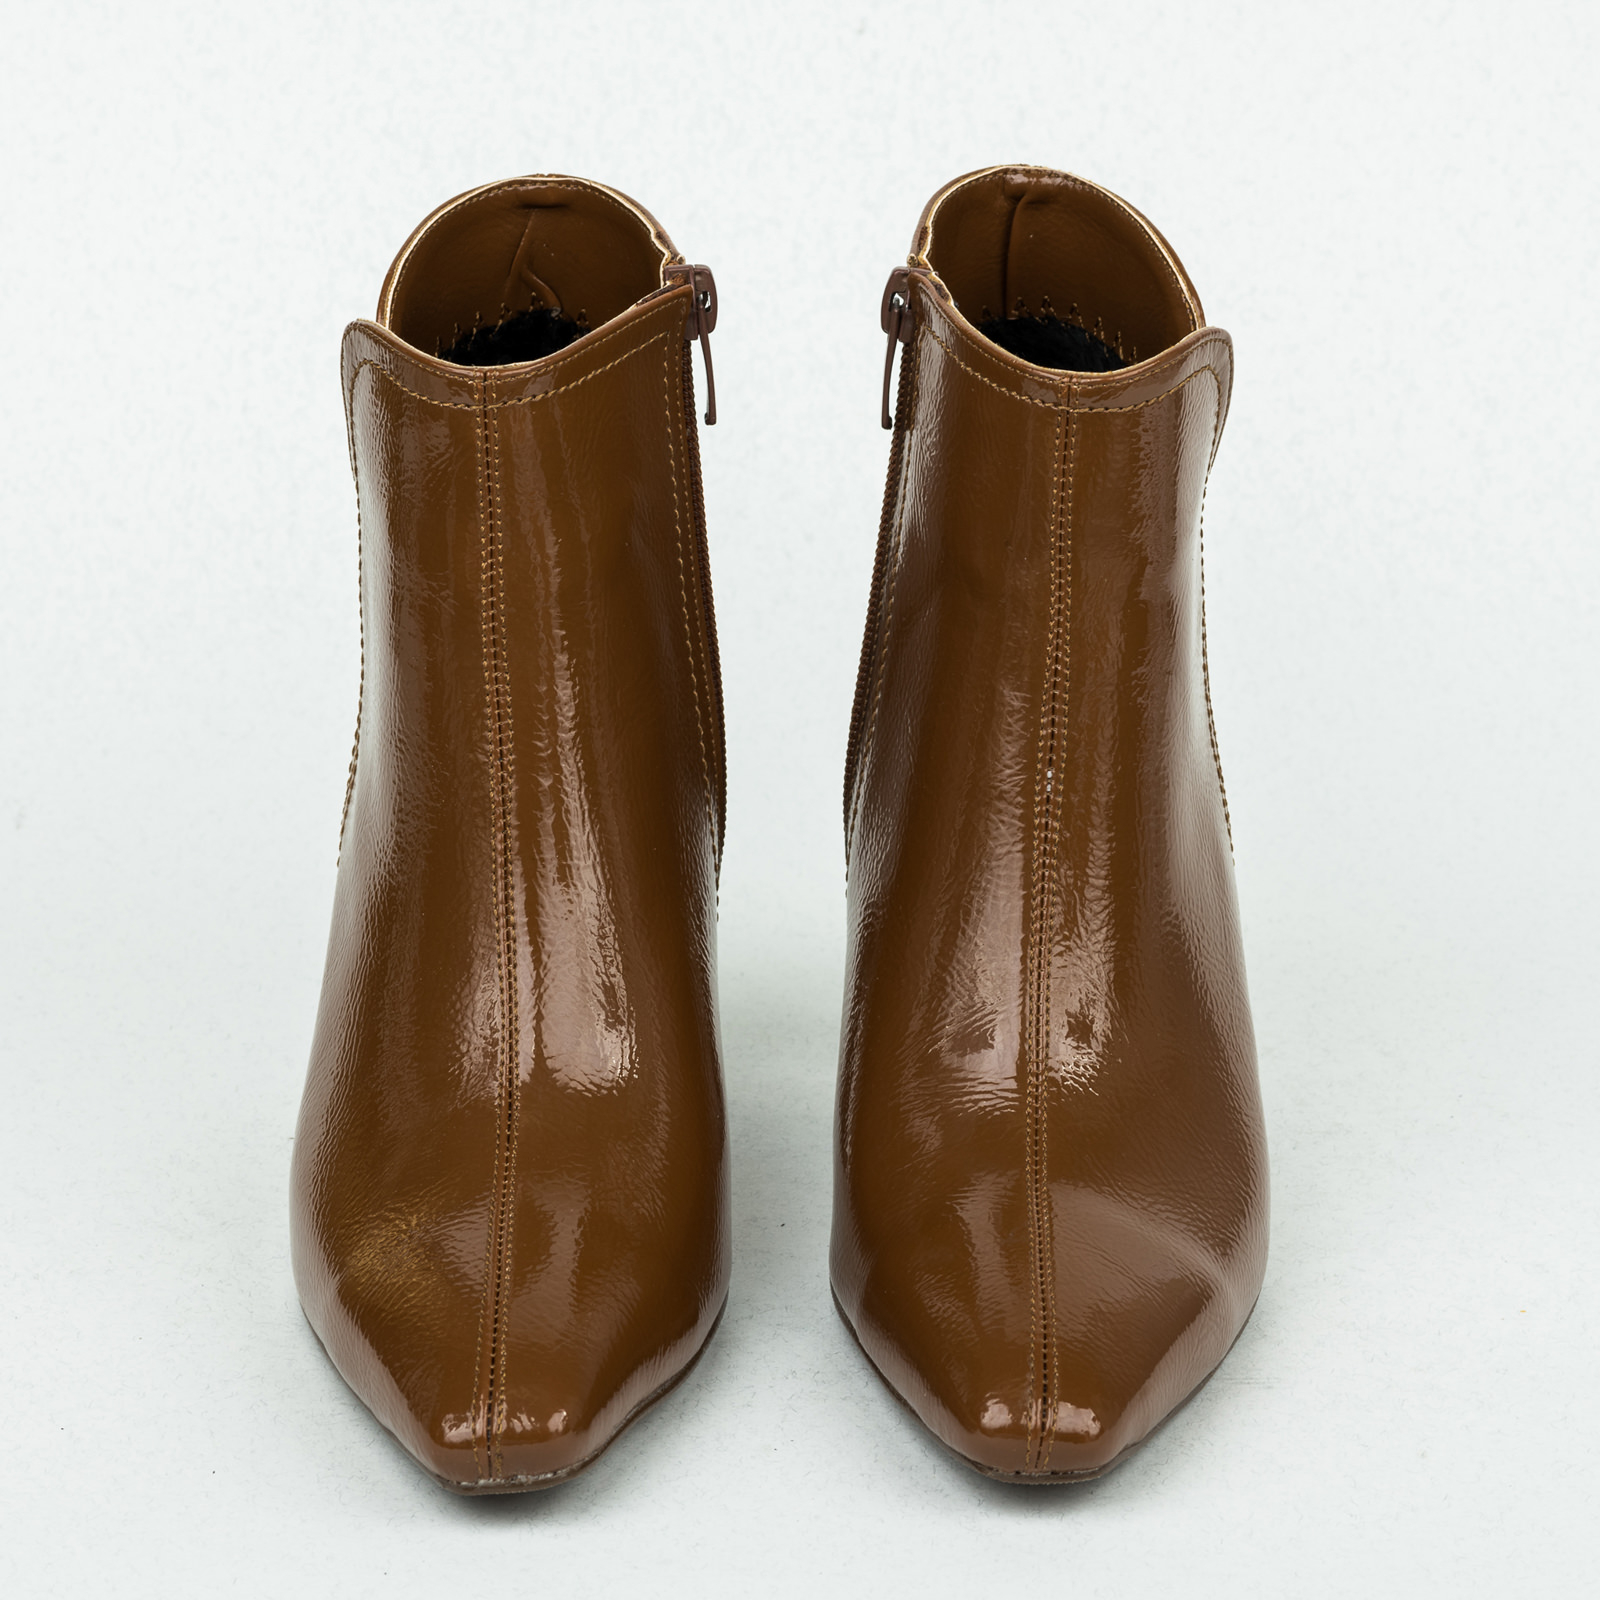 Women ankle boots B165 - CAMEL